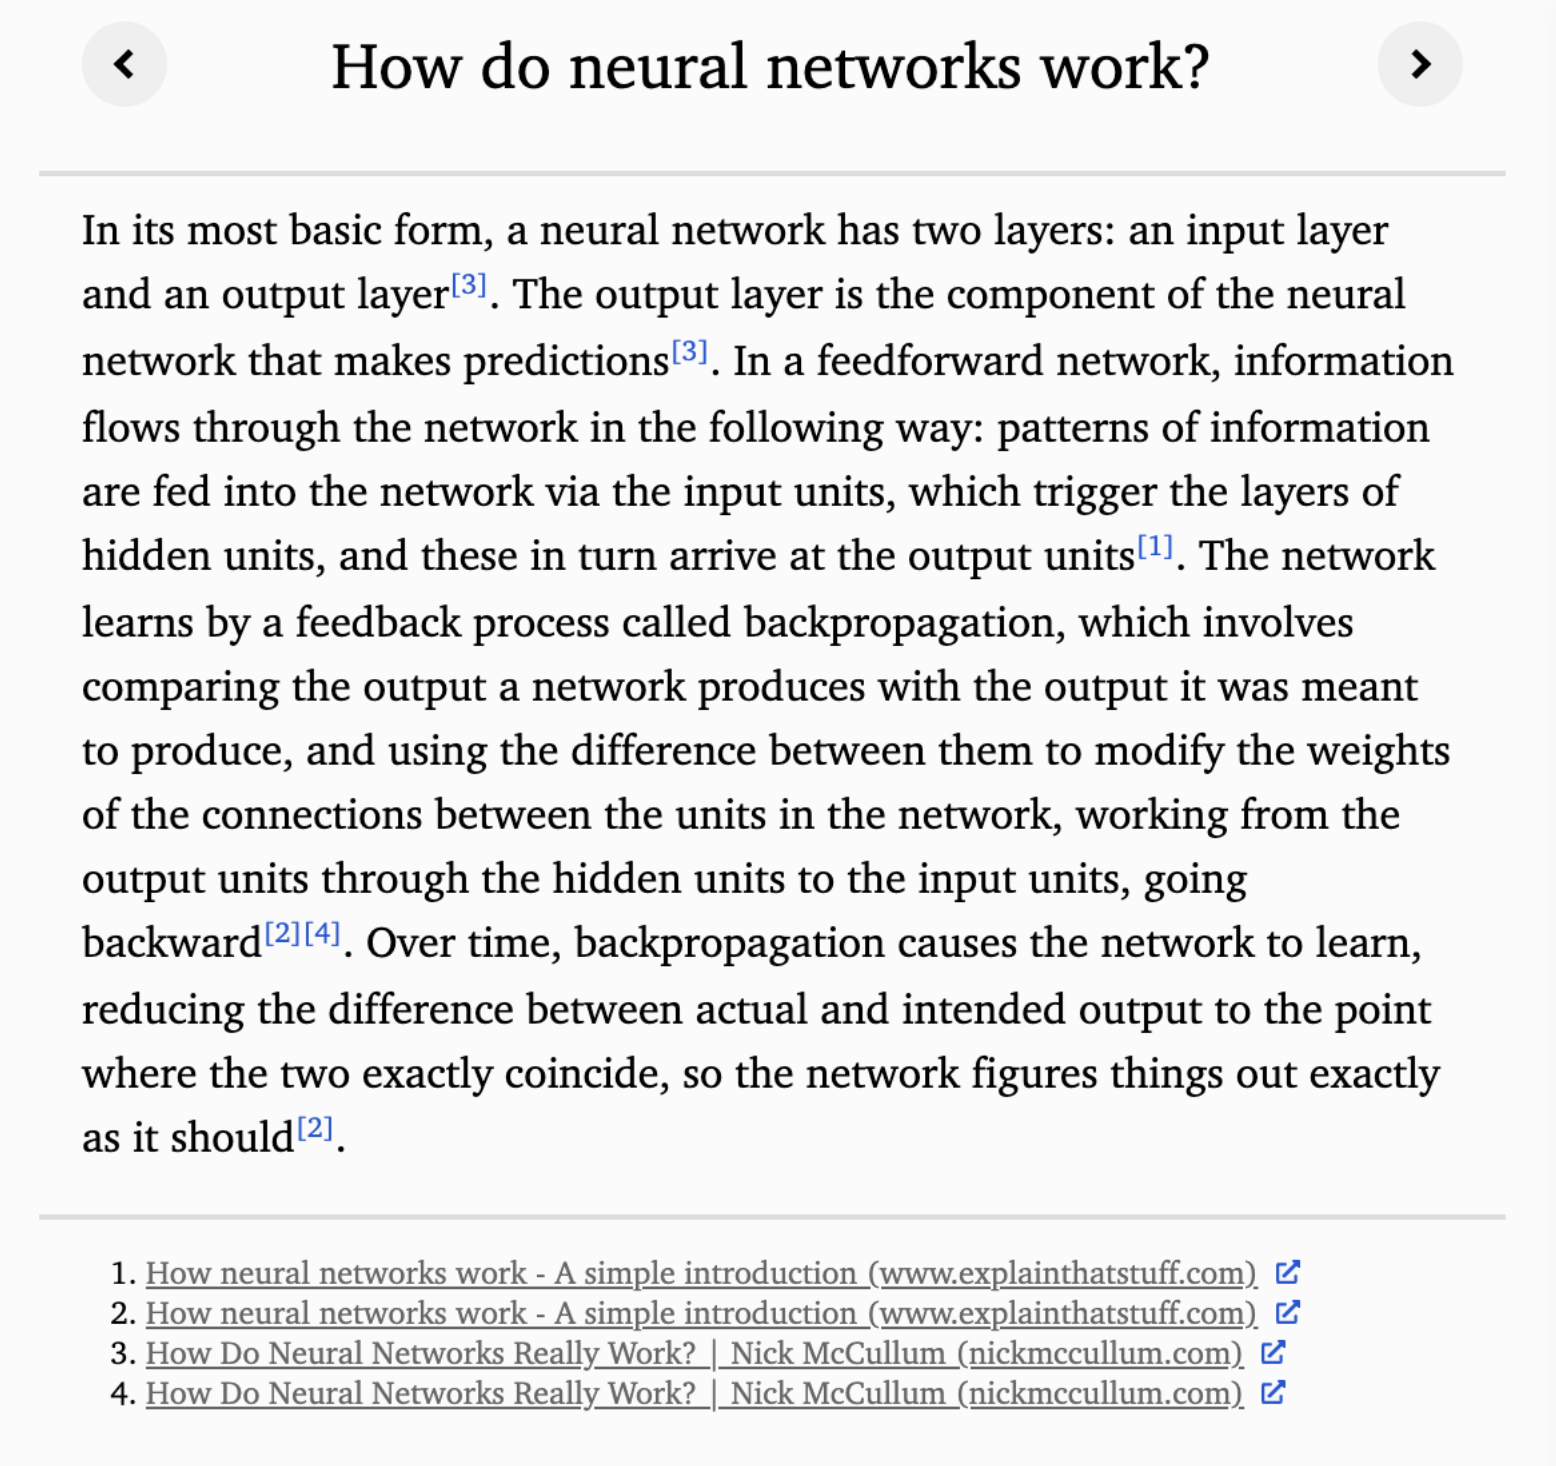 Final output generated by WebGPT for the question 'How do neural networks work?'. Note the presence of References at the bottom. Taken from the official blog.